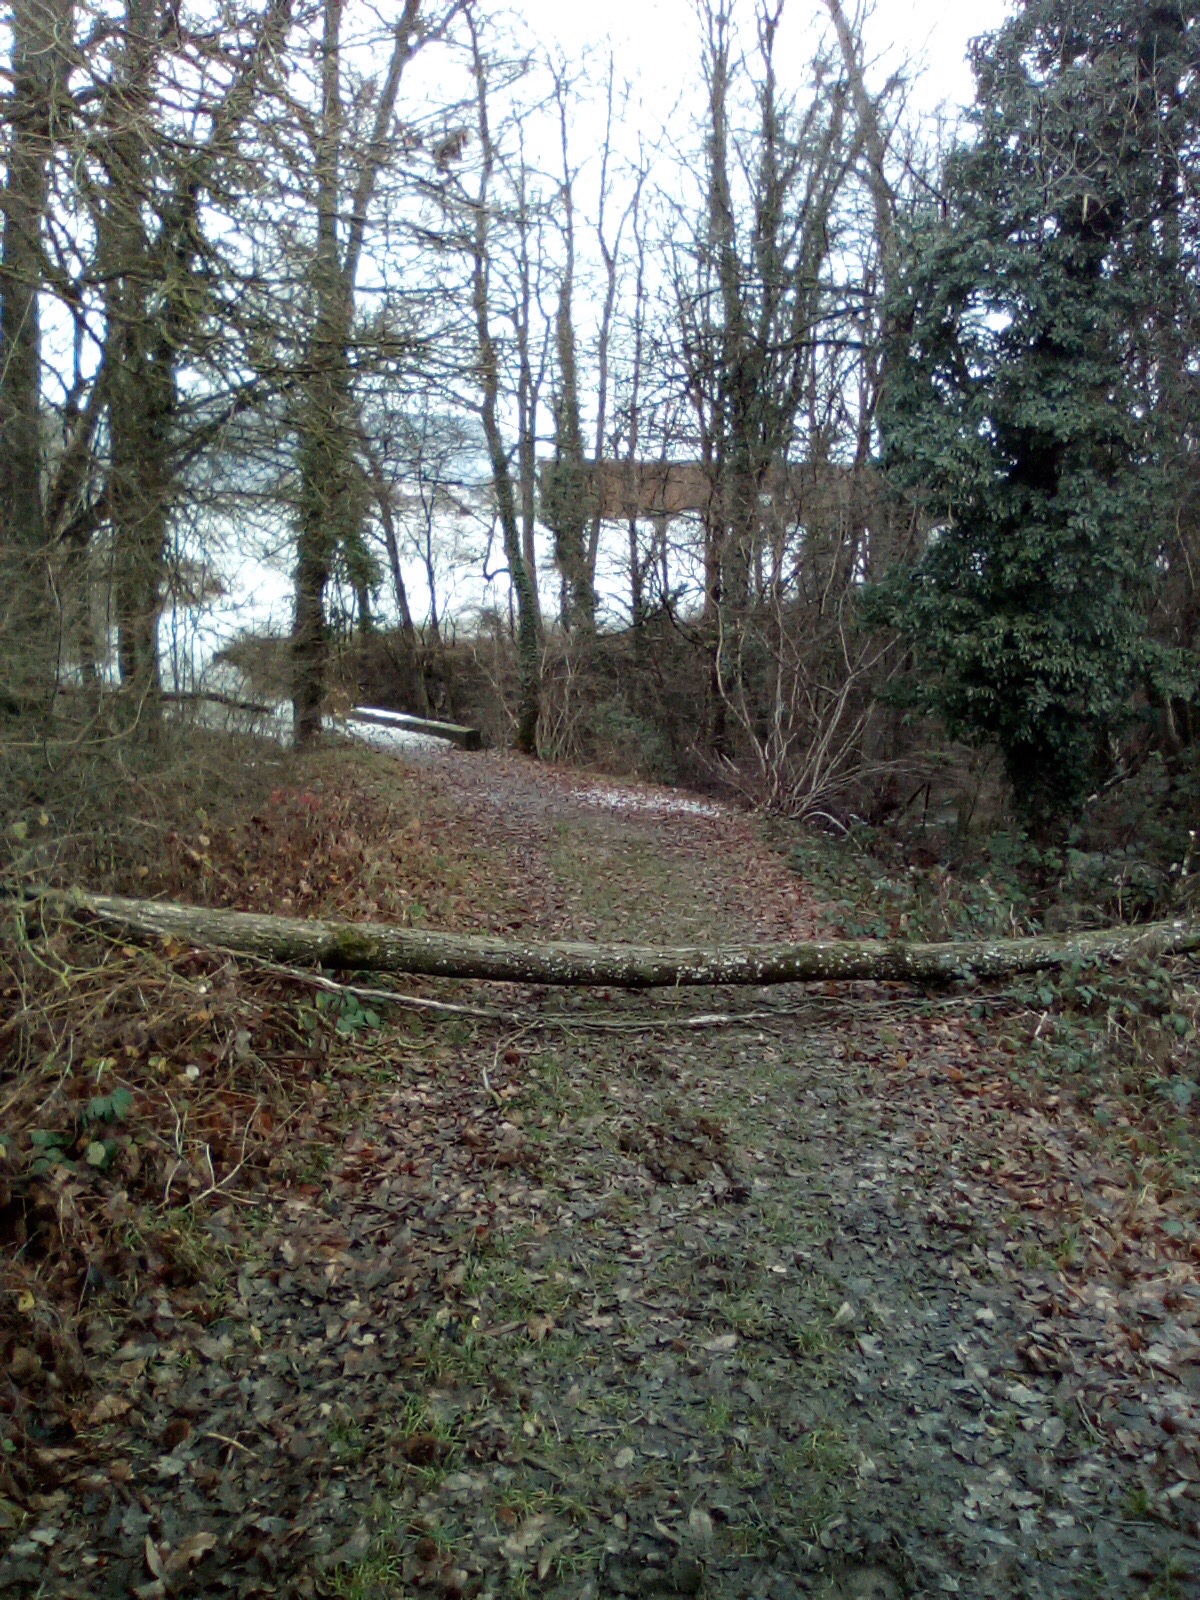 A Fallen Tree. Images taken With The Crosscall S4